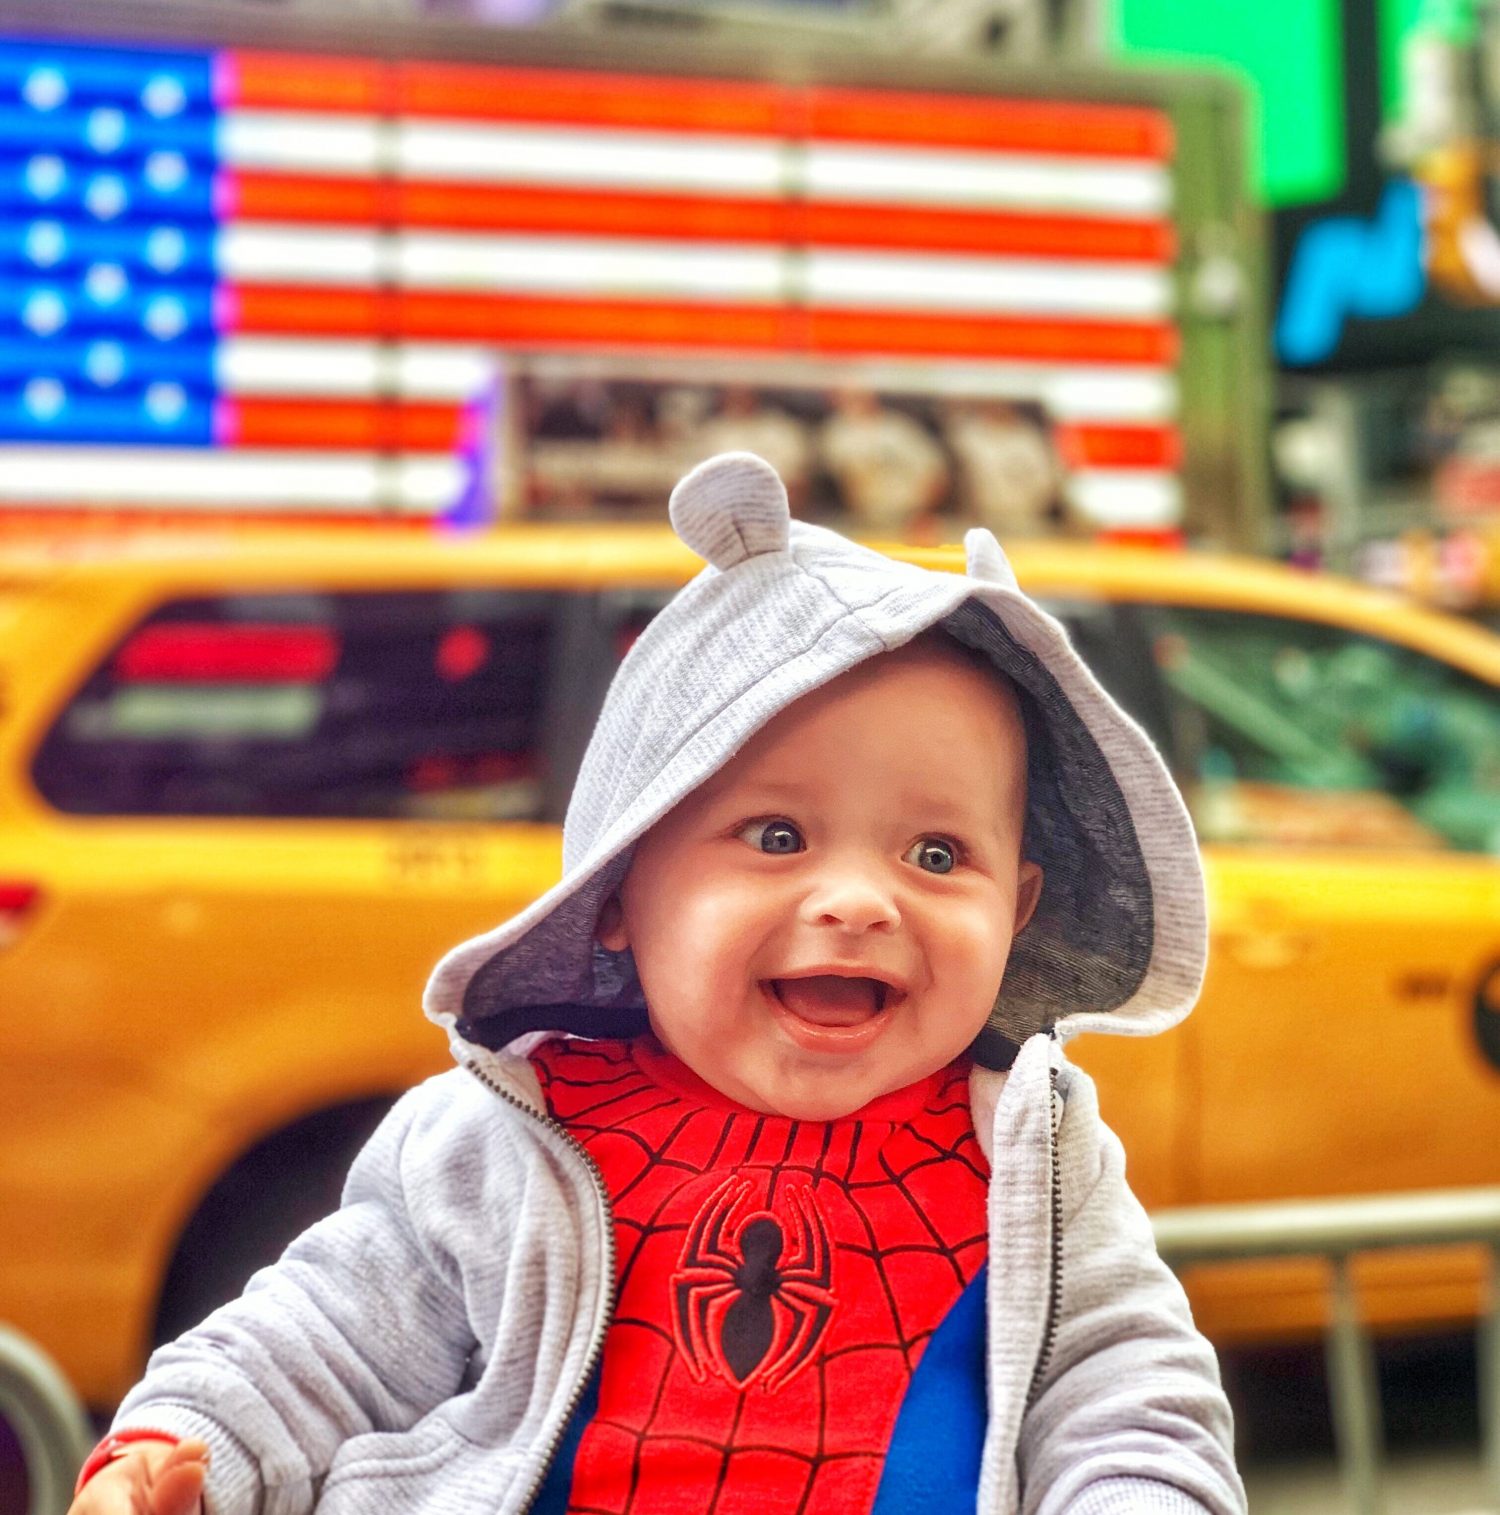 THINGS TO DO IN NYC WITH A BABY